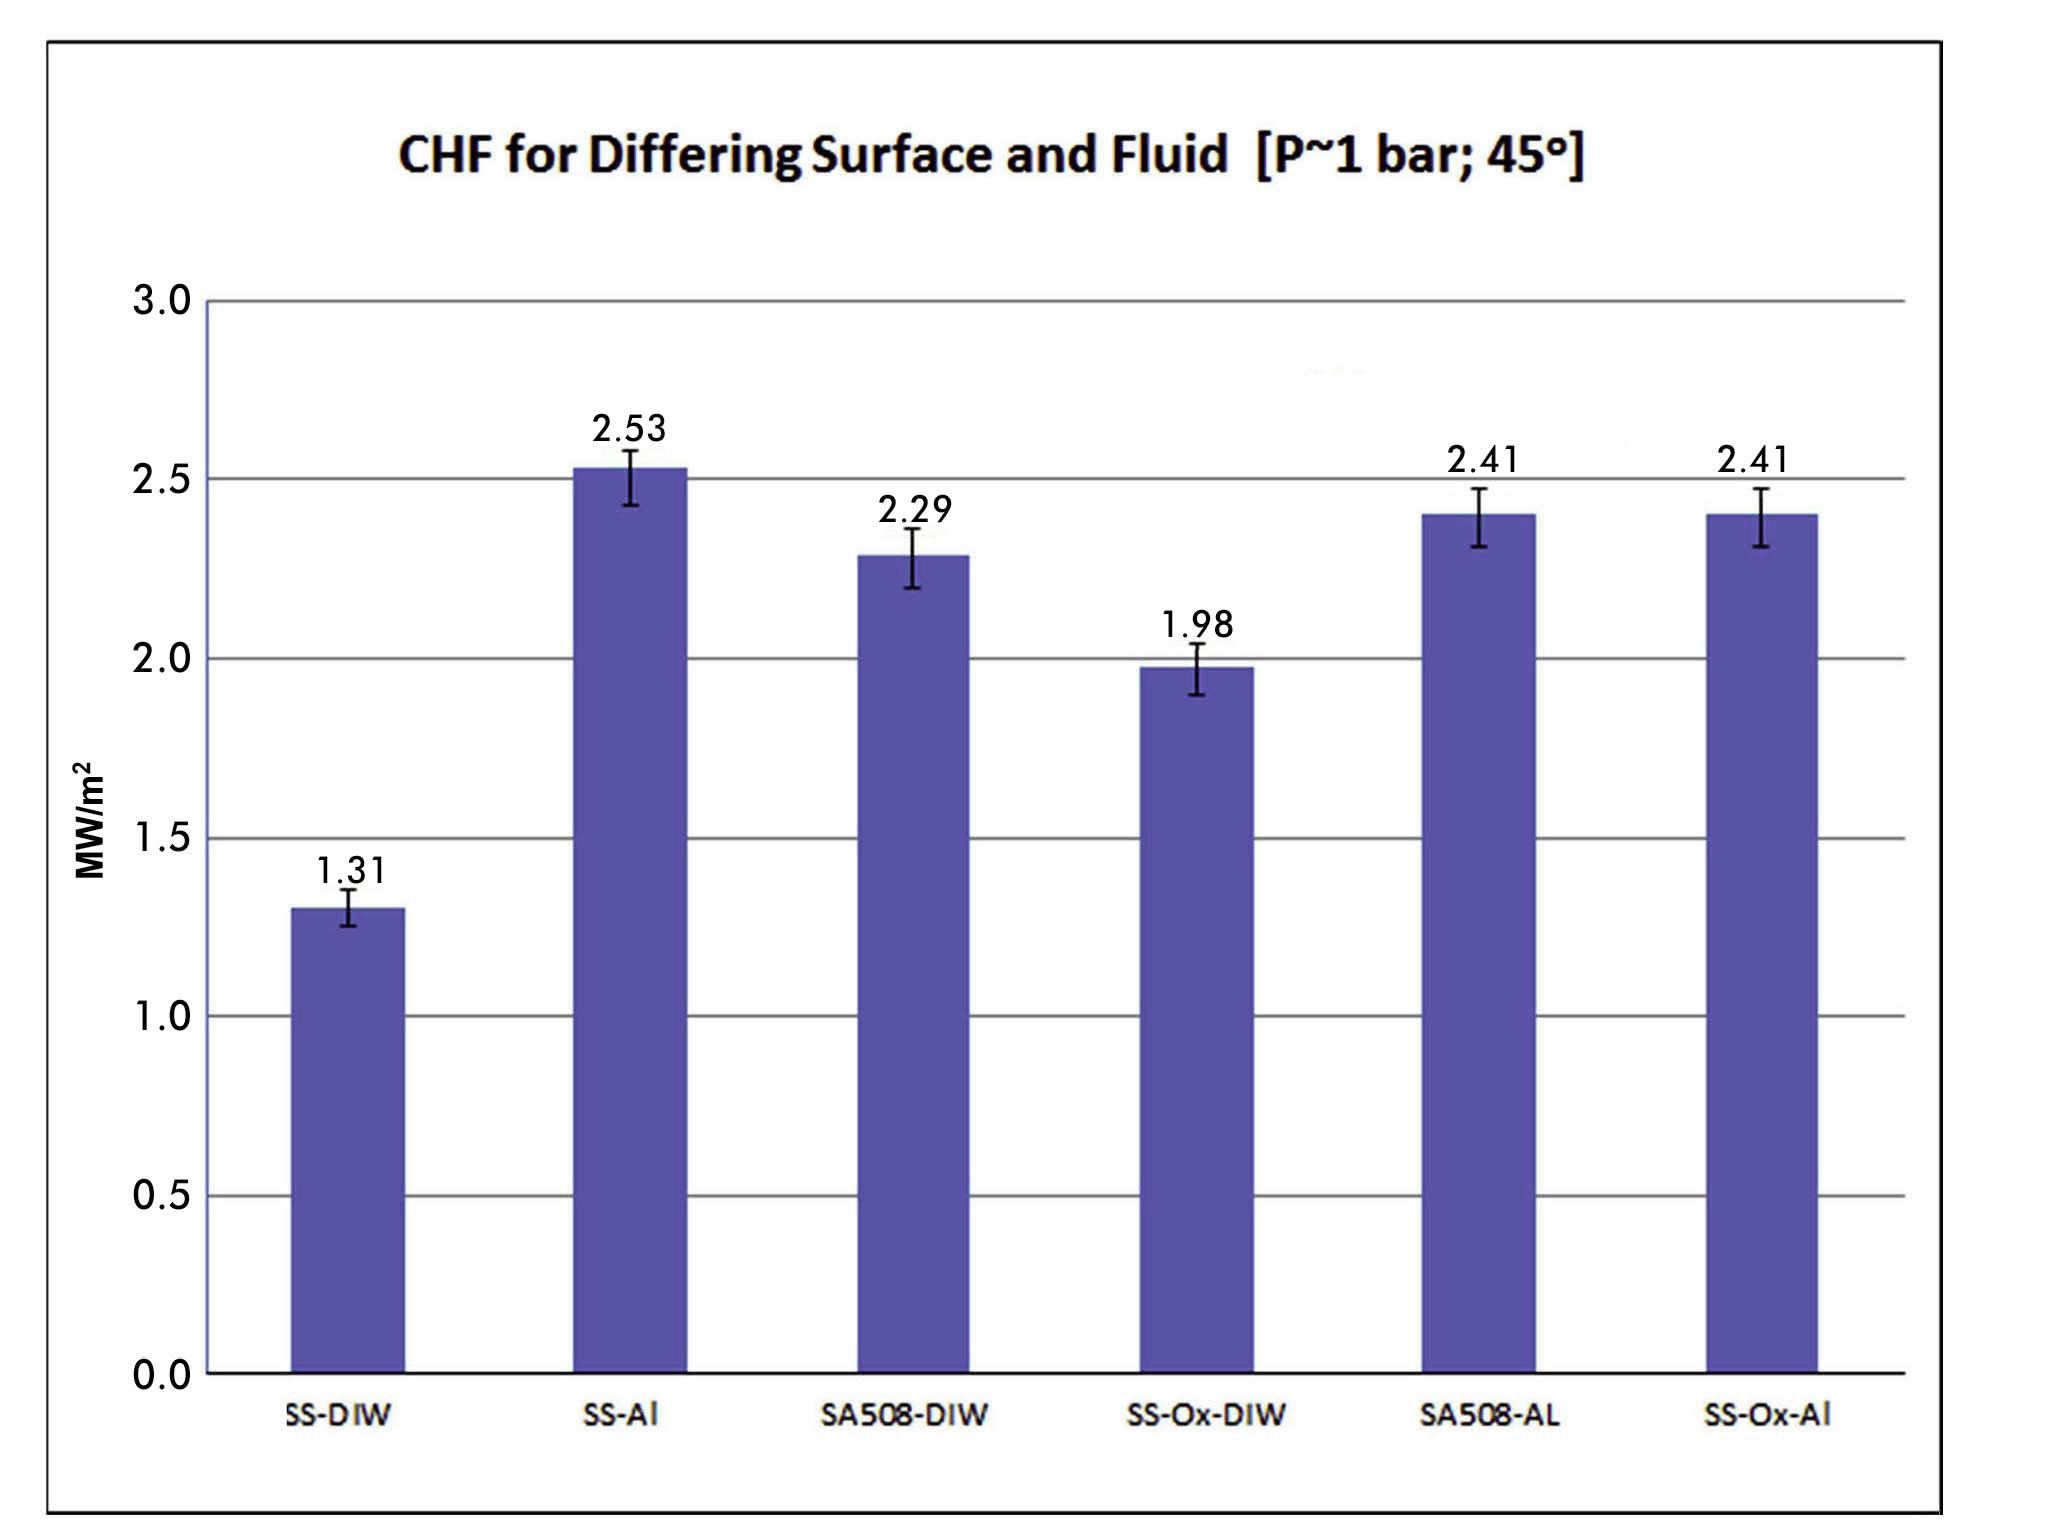 CHF versus Surface Material